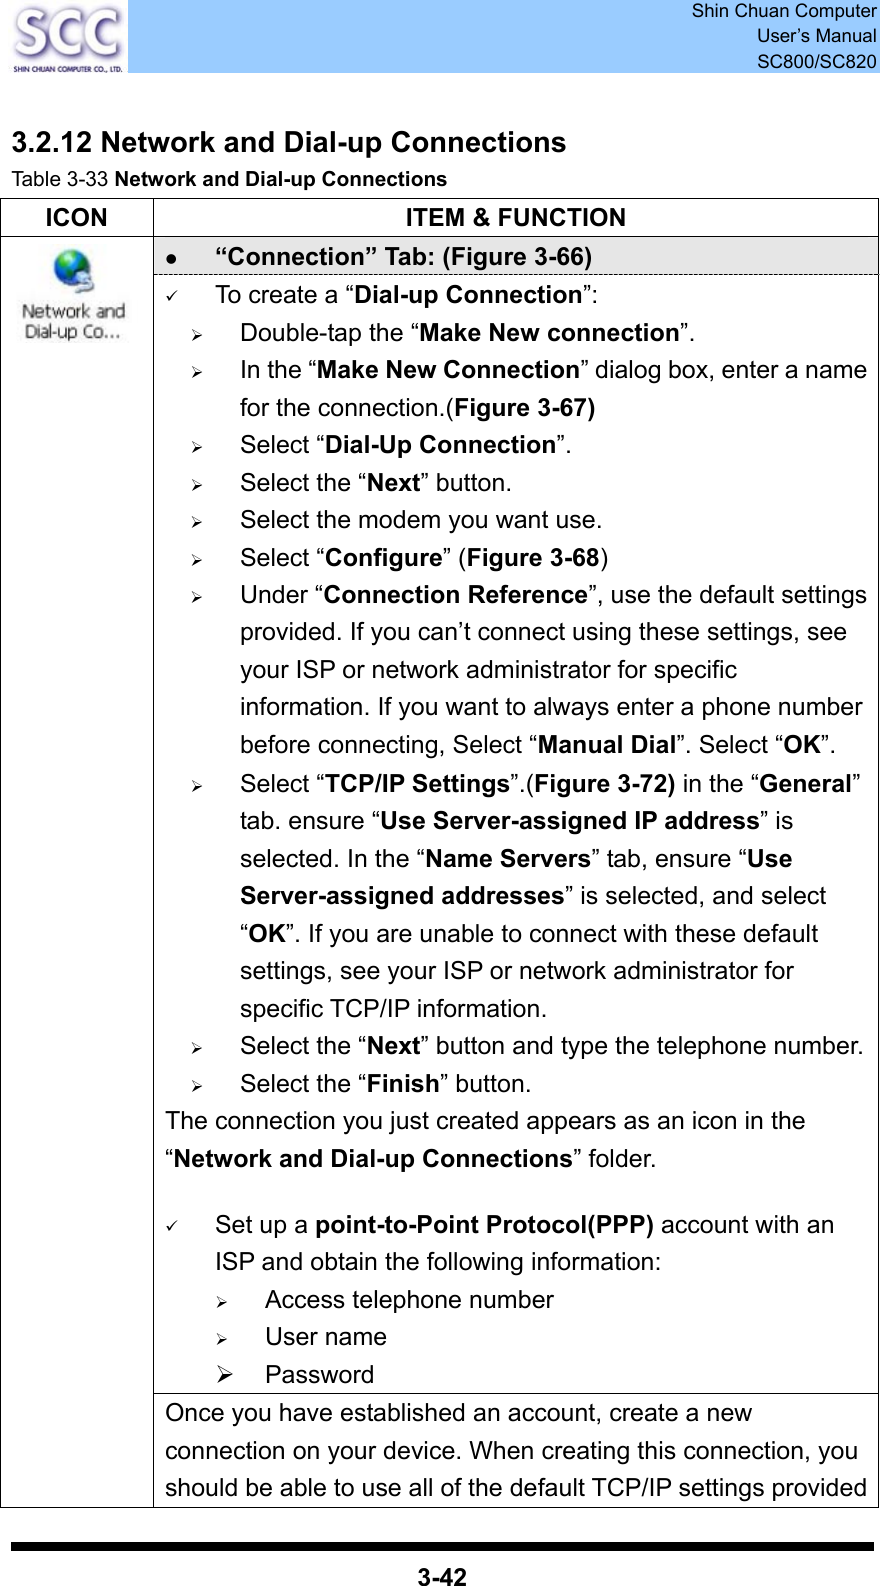  Shin Chuan Computer User’s Manual SC800/SC820  3-42  3.2.12 Network and Dial-up Connections Table 3-33 Network and Dial-up Connections ICON  ITEM &amp; FUNCTION z “Connection” Tab: (Figure 3-66) 9 To create a “Dial-up Connection”: ¾ Double-tap the “Make New connection”. ¾ In the “Make New Connection” dialog box, enter a name for the connection.(Figure 3-67) ¾ Select “Dial-Up Connection”. ¾ Select the “Next” button. ¾ Select the modem you want use. ¾ Select “Configure” (Figure 3-68) ¾ Under “Connection Reference”, use the default settings provided. If you can’t connect using these settings, see your ISP or network administrator for specific information. If you want to always enter a phone number before connecting, Select “Manual Dial”. Select “OK”. ¾ Select “TCP/IP Settings”.(Figure 3-72) in the “General” tab. ensure “Use Server-assigned IP address” is selected. In the “Name Servers” tab, ensure “Use Server-assigned addresses” is selected, and select “OK”. If you are unable to connect with these default settings, see your ISP or network administrator for specific TCP/IP information. ¾ Select the “Next” button and type the telephone number.¾ Select the “Finish” button. The connection you just created appears as an icon in the “Network and Dial-up Connections” folder.    9 Set up a point-to-Point Protocol(PPP) account with an ISP and obtain the following information: ¾ Access telephone number ¾ User name ¾ Password  Once you have established an account, create a new connection on your device. When creating this connection, you should be able to use all of the default TCP/IP settings provided 